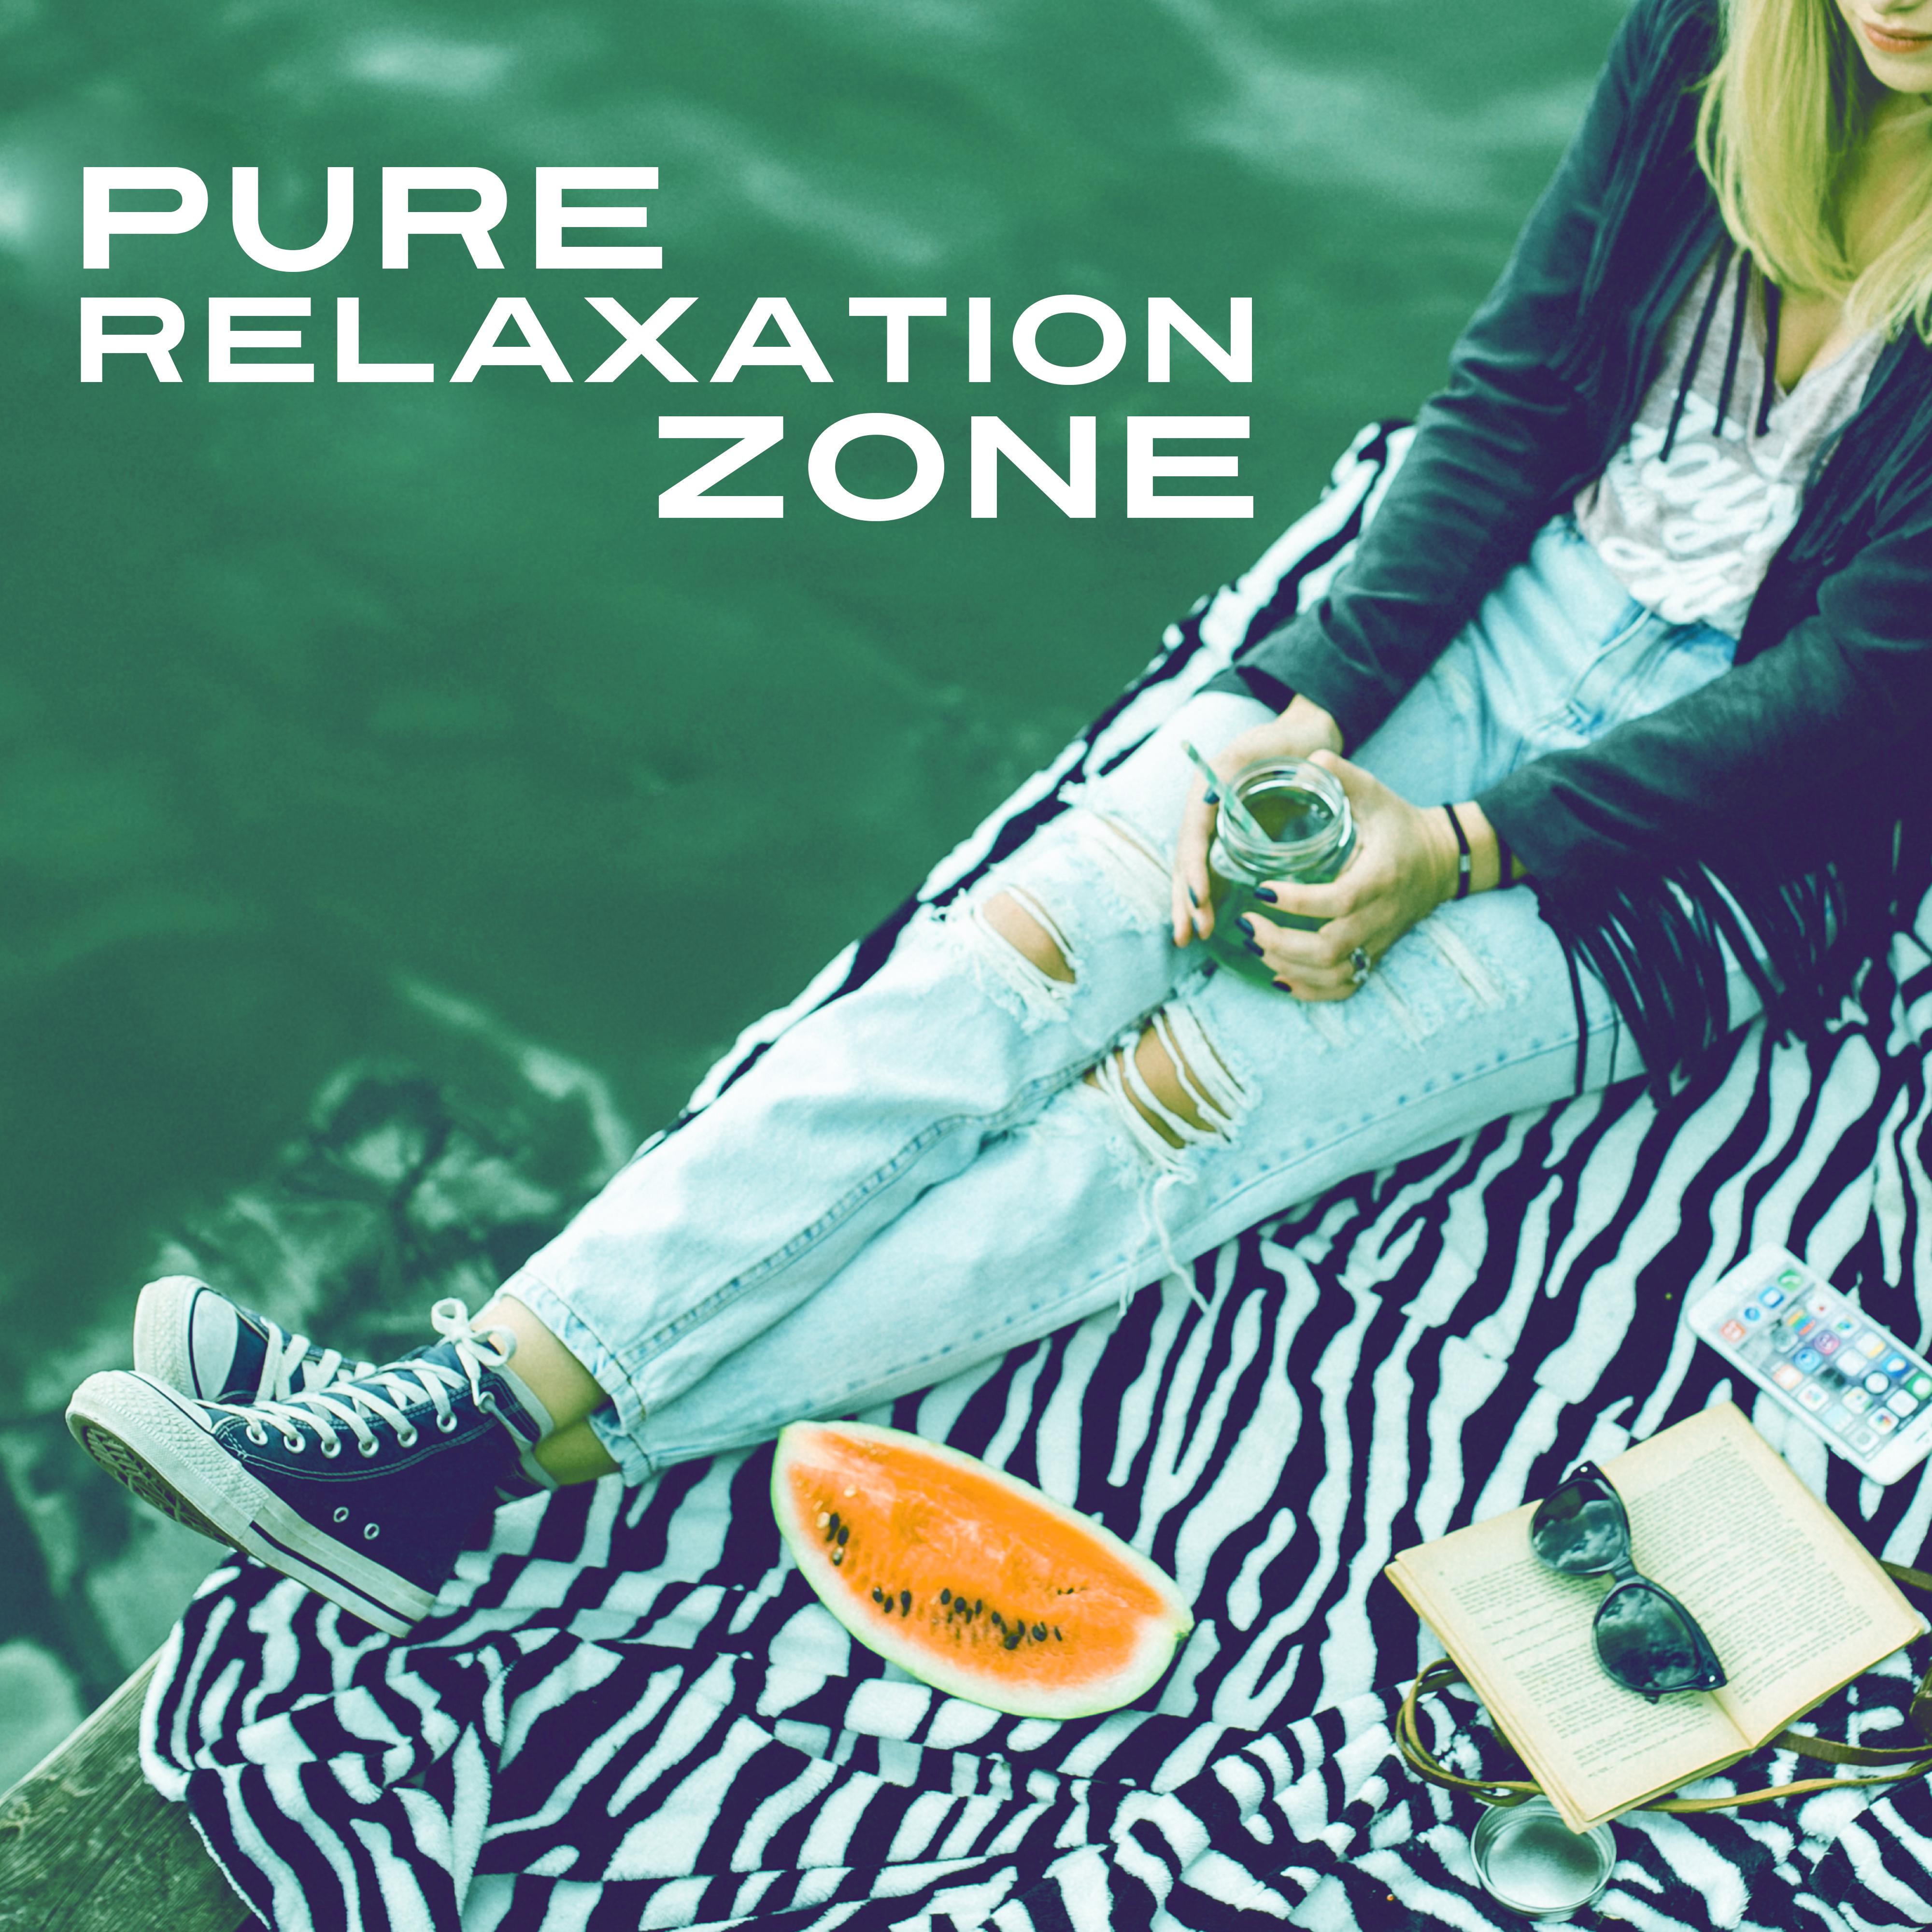 Pure Relaxation Zone  New Age Music, Relaxation Music for Hotel Spa, Healing Sounds of Nature, Massage Music, Reduce Stress